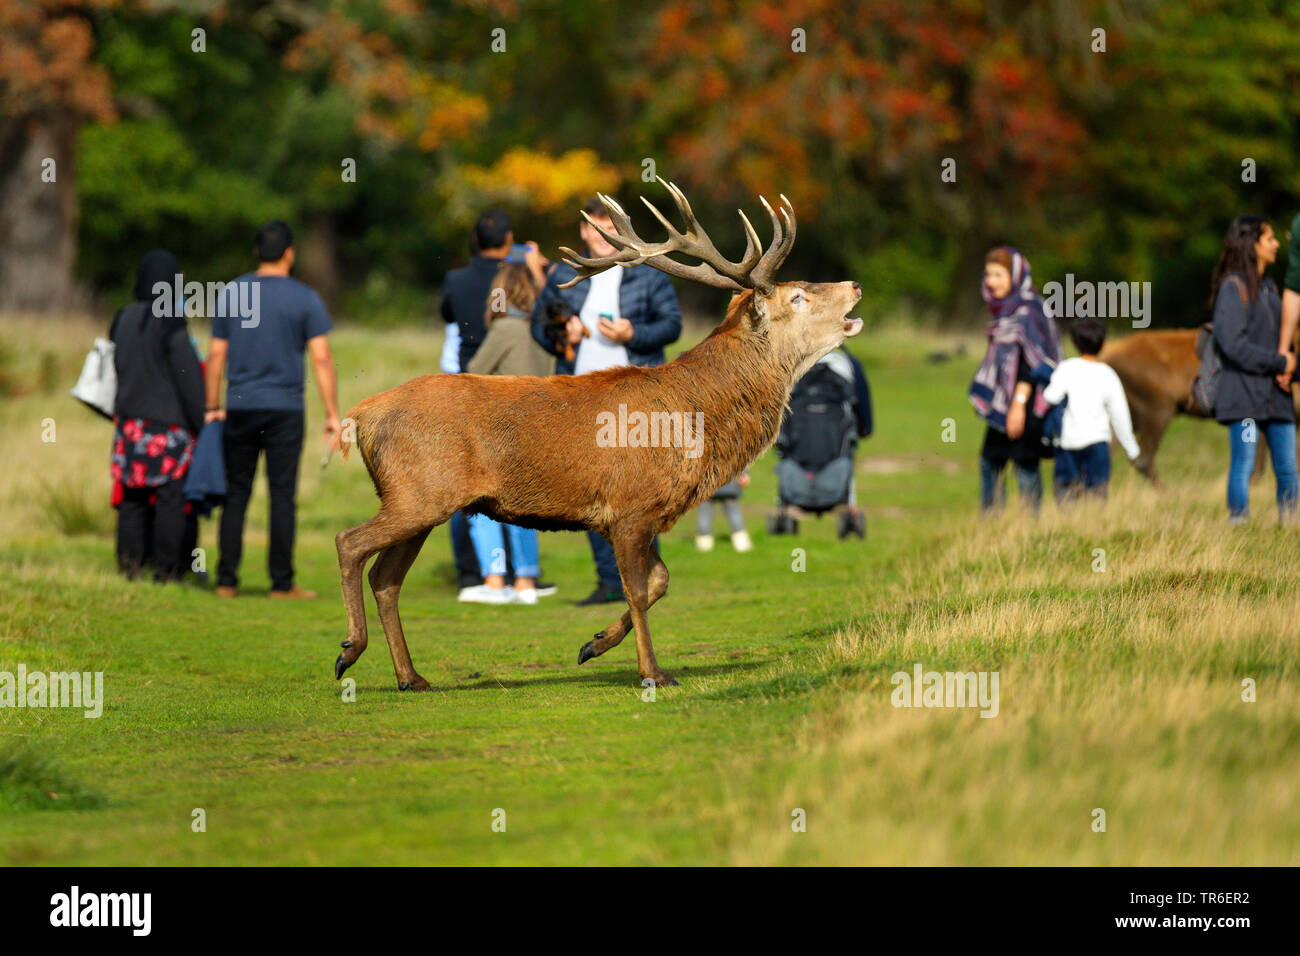 red deer (Cervus elaphus), roaring stag and visitors in the Richmond Park, United Kingdom, England, London Stock Photo